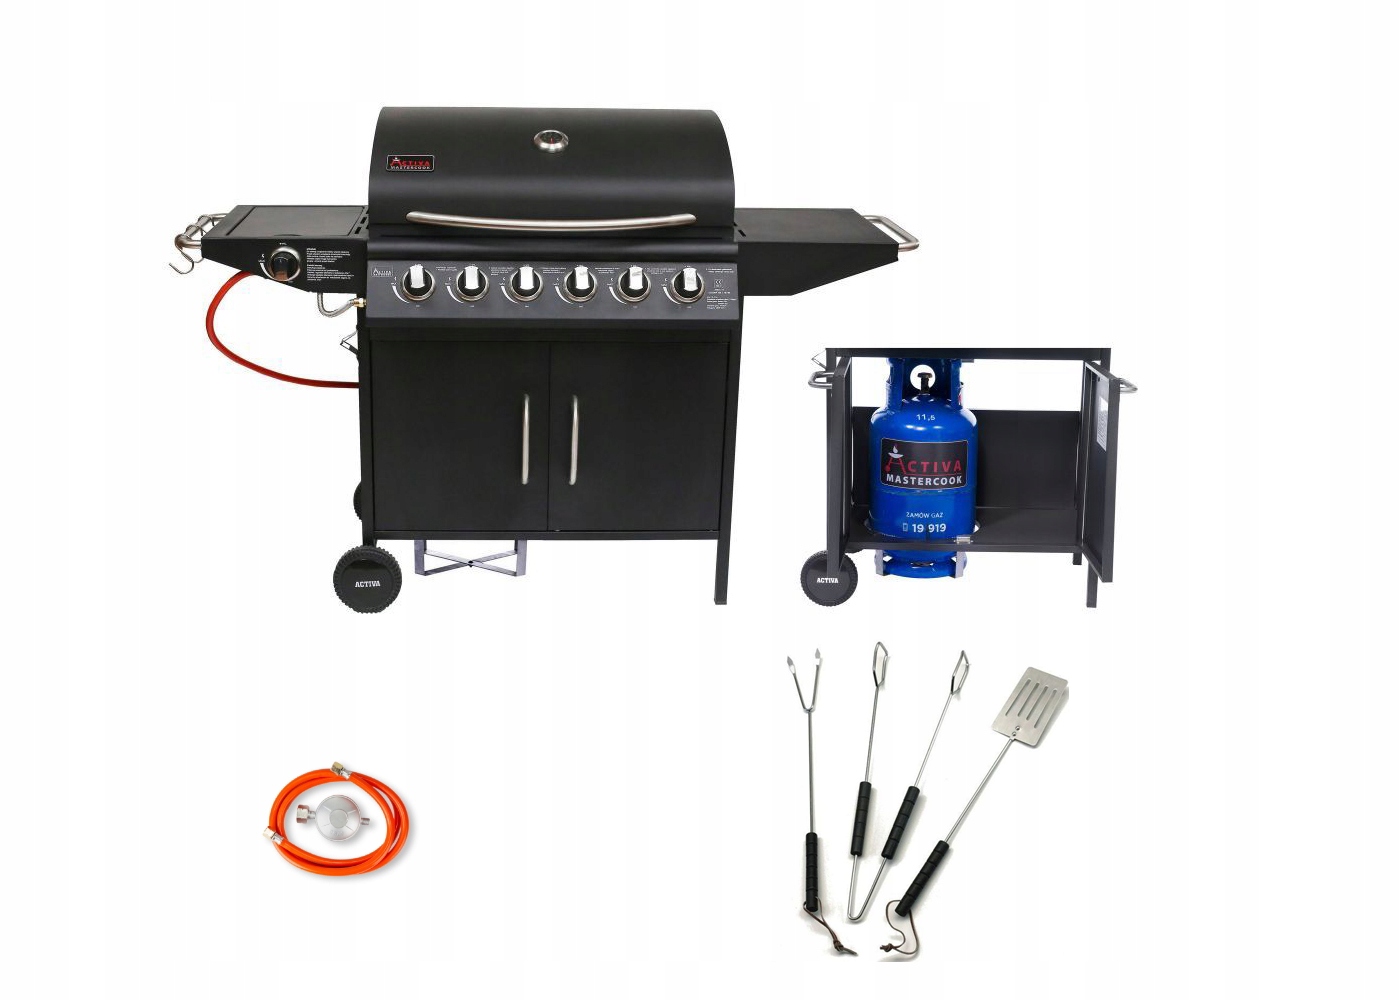 Activa Florida Gas Grill - Fire Grate + Príbory